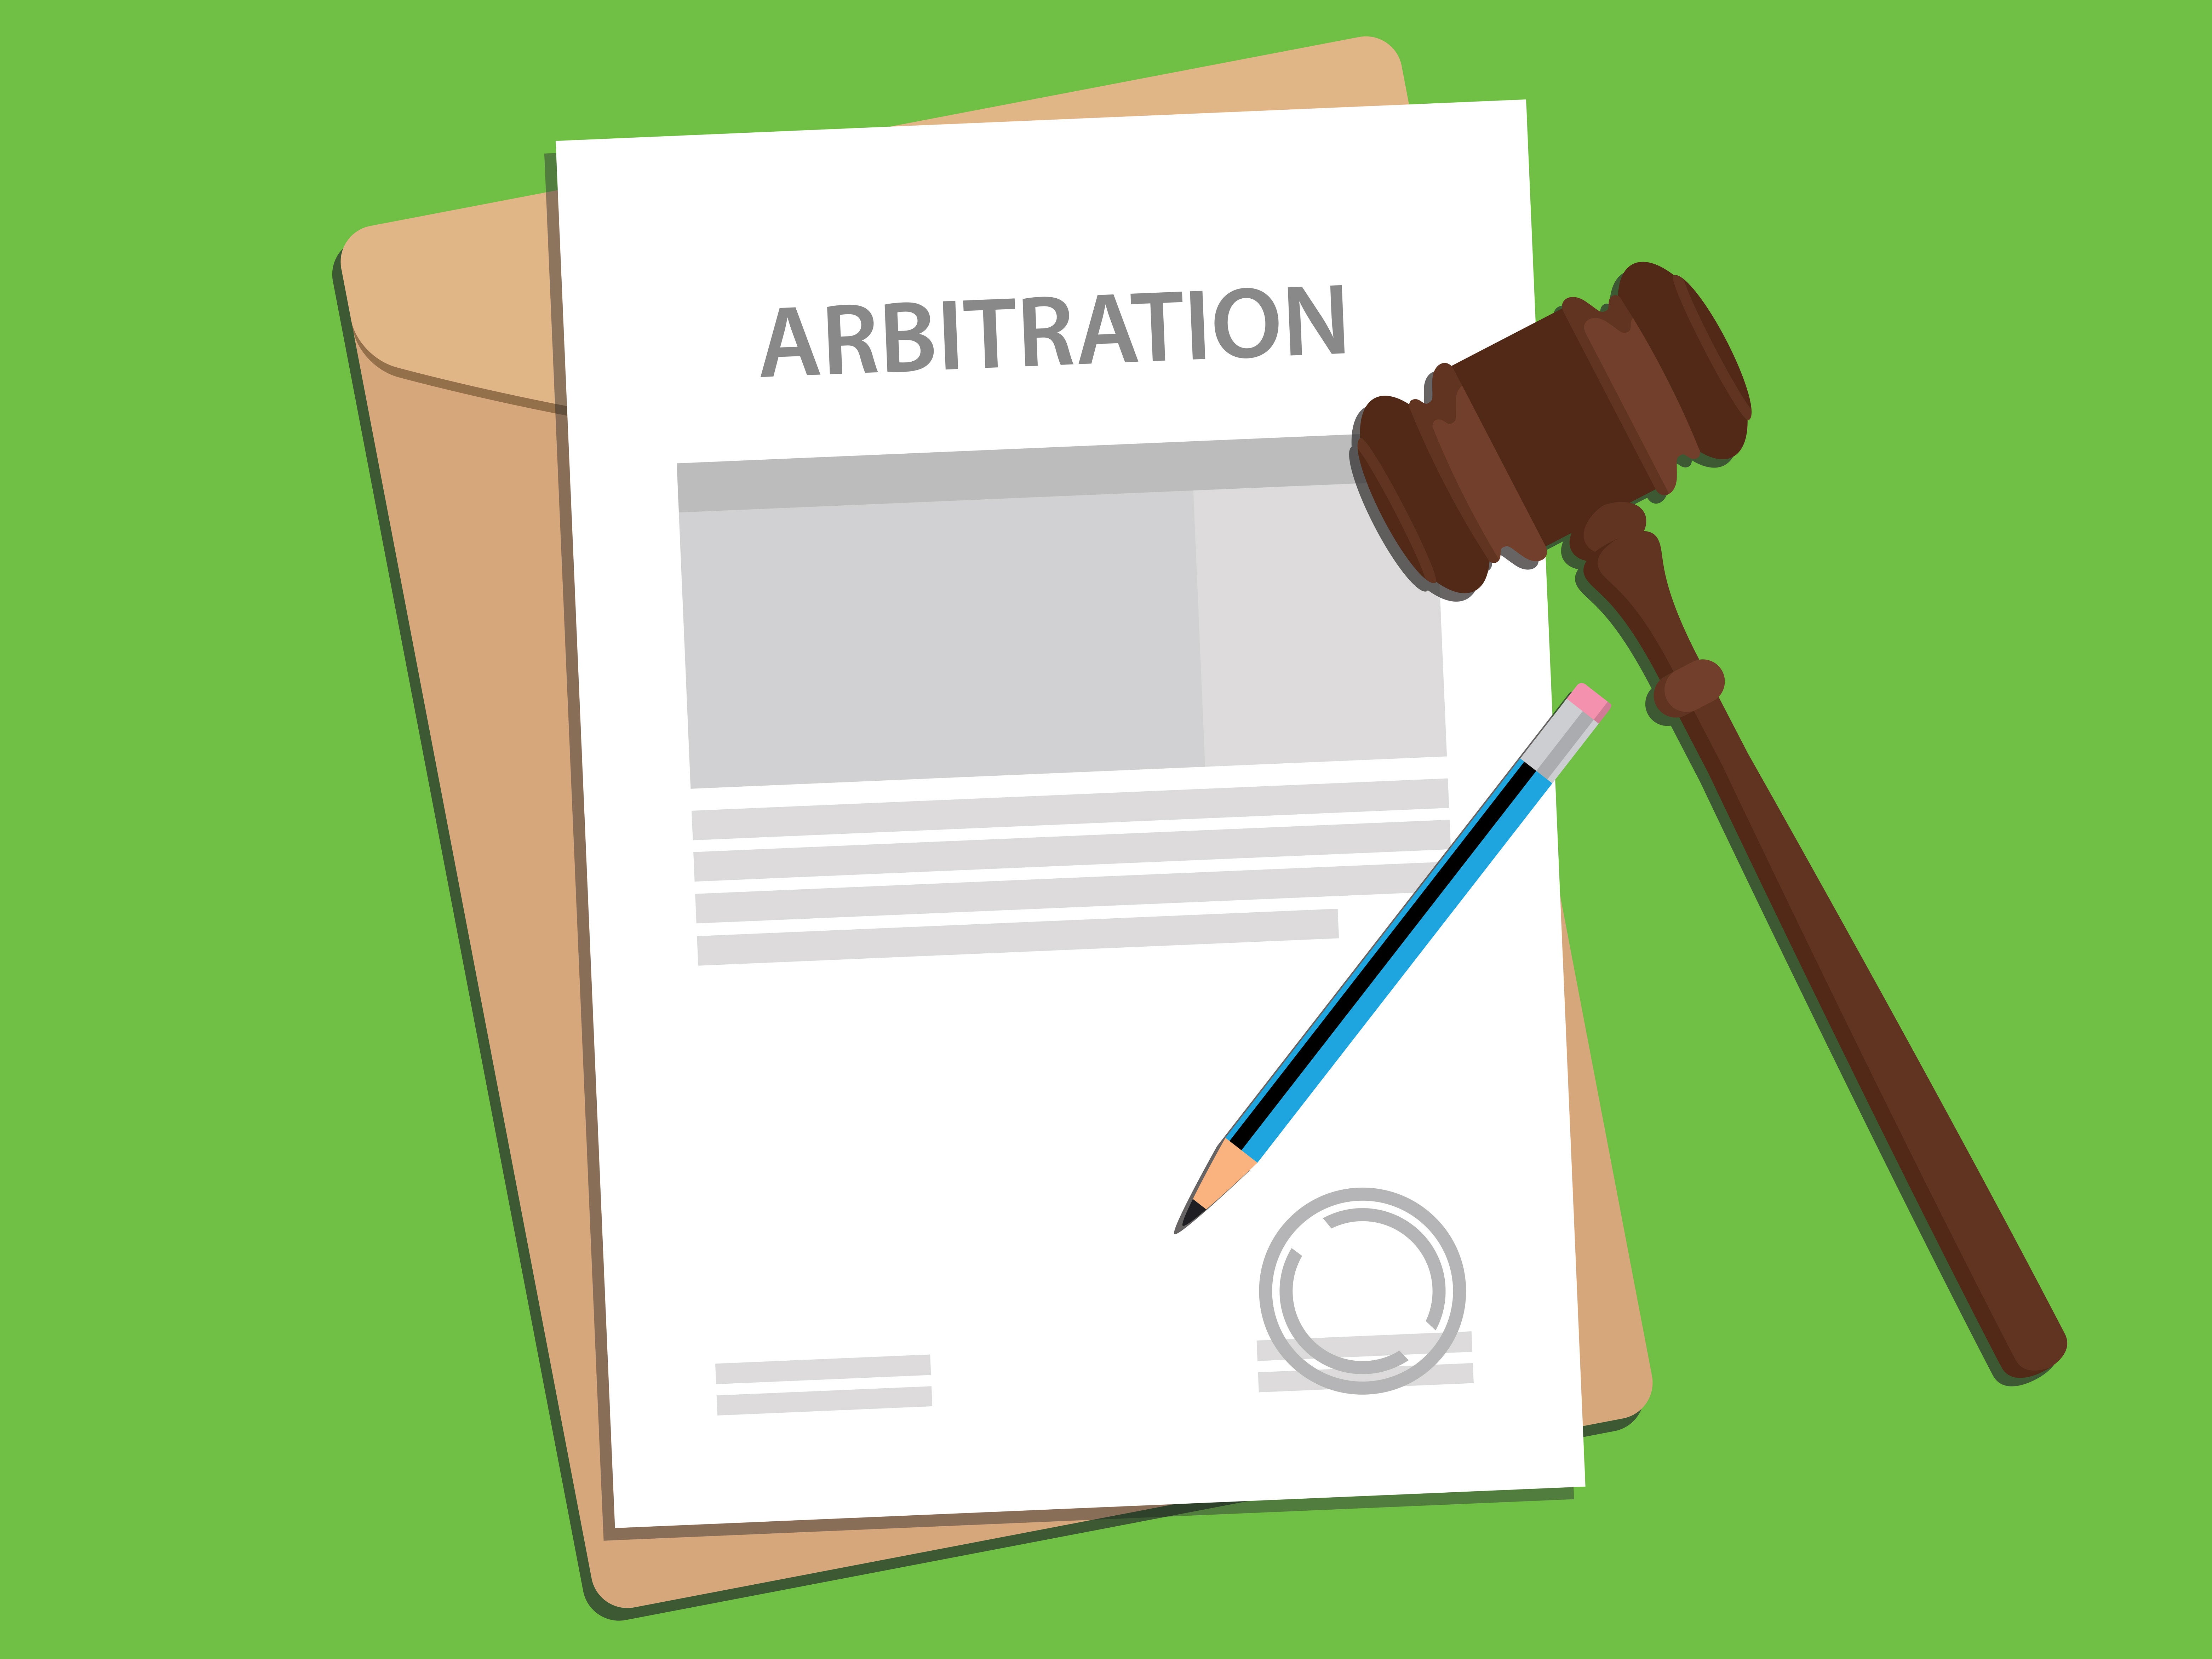 Arbitration – the right to arbitrate